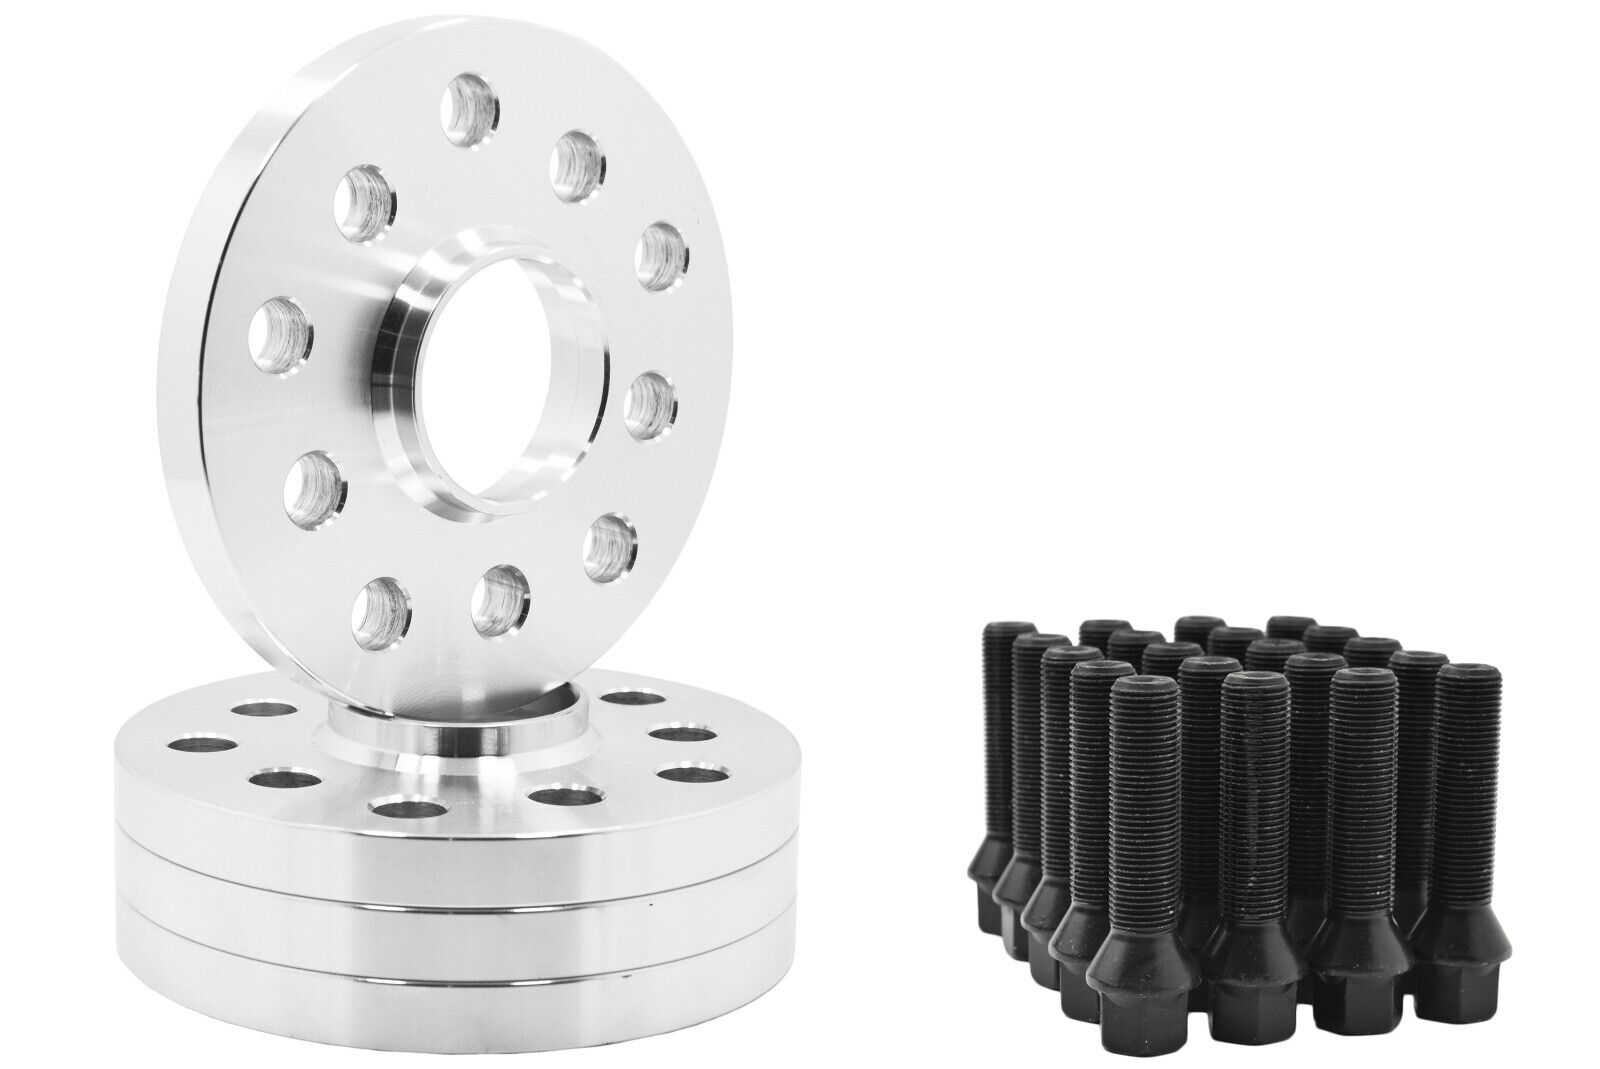 Complete Set of BMW 4x100 17MM Thick Hub Centric Wheel Spacer Kit 57.1 Hub Bore 